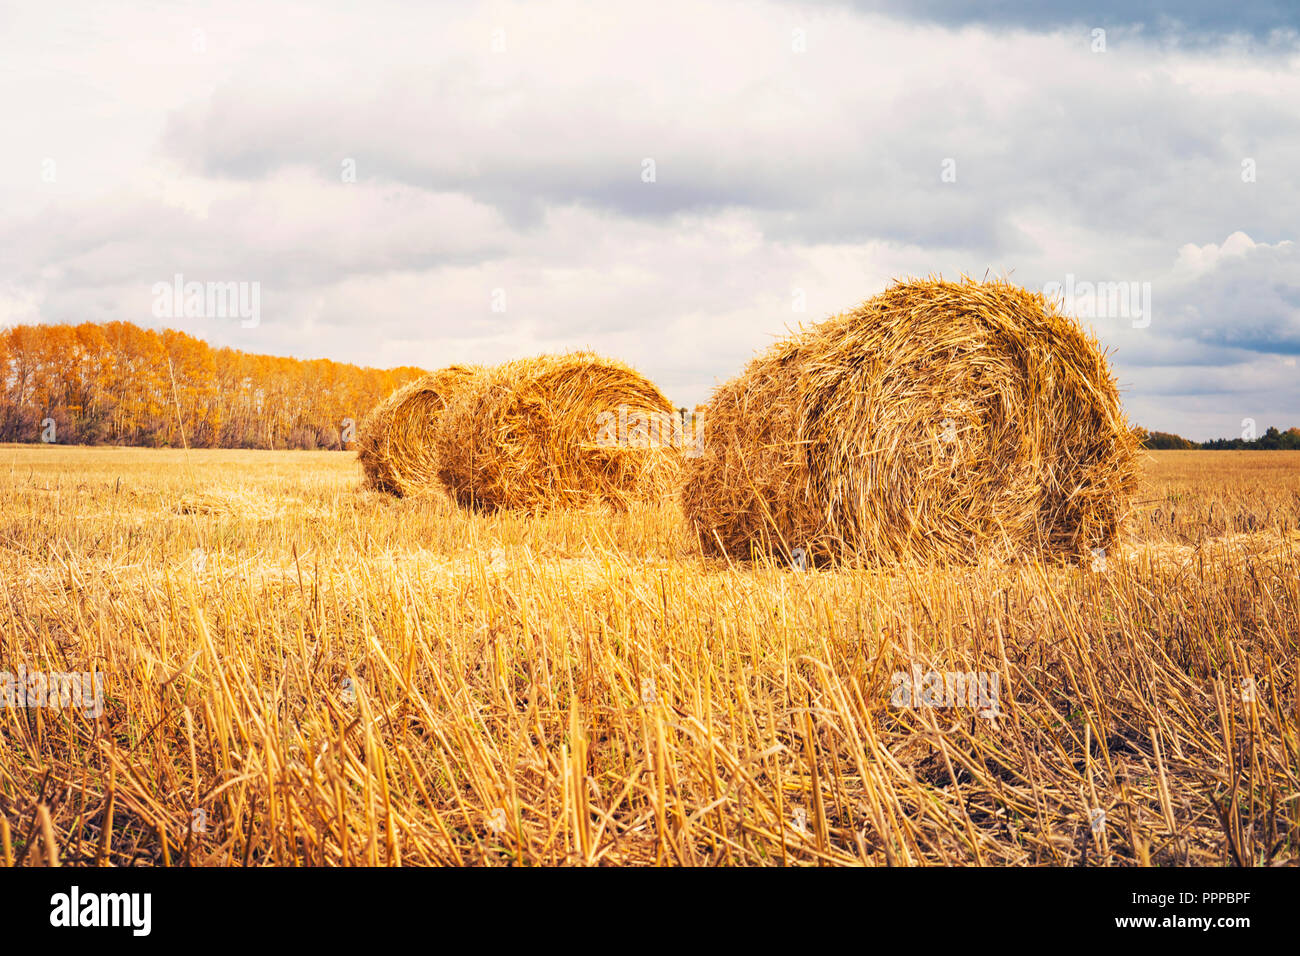 Hay bale. Agriculture field with sky. Rural nature in the farm land. Straw on the meadow. Wheat yellow golden harvest in summer. Countryside natural landscape. Grain crop, harvesting. Stock Photo